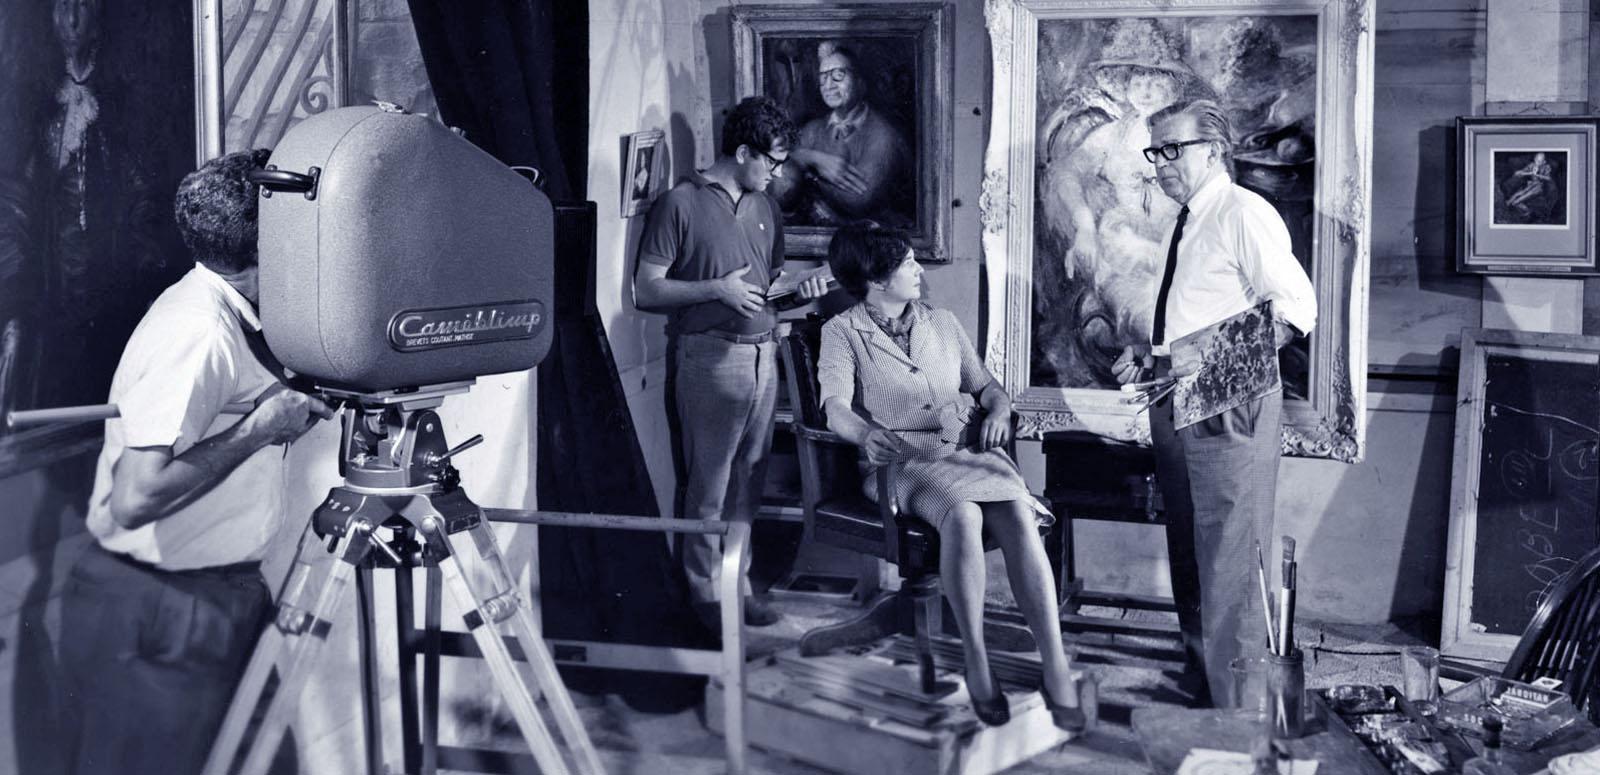 Blue-tinted black and white still of a man is operating a large film camera. He is filming artists Margaret Olley and William Dobell. There are two portraits painted by Dobell in the background as well as another member of the film crew.